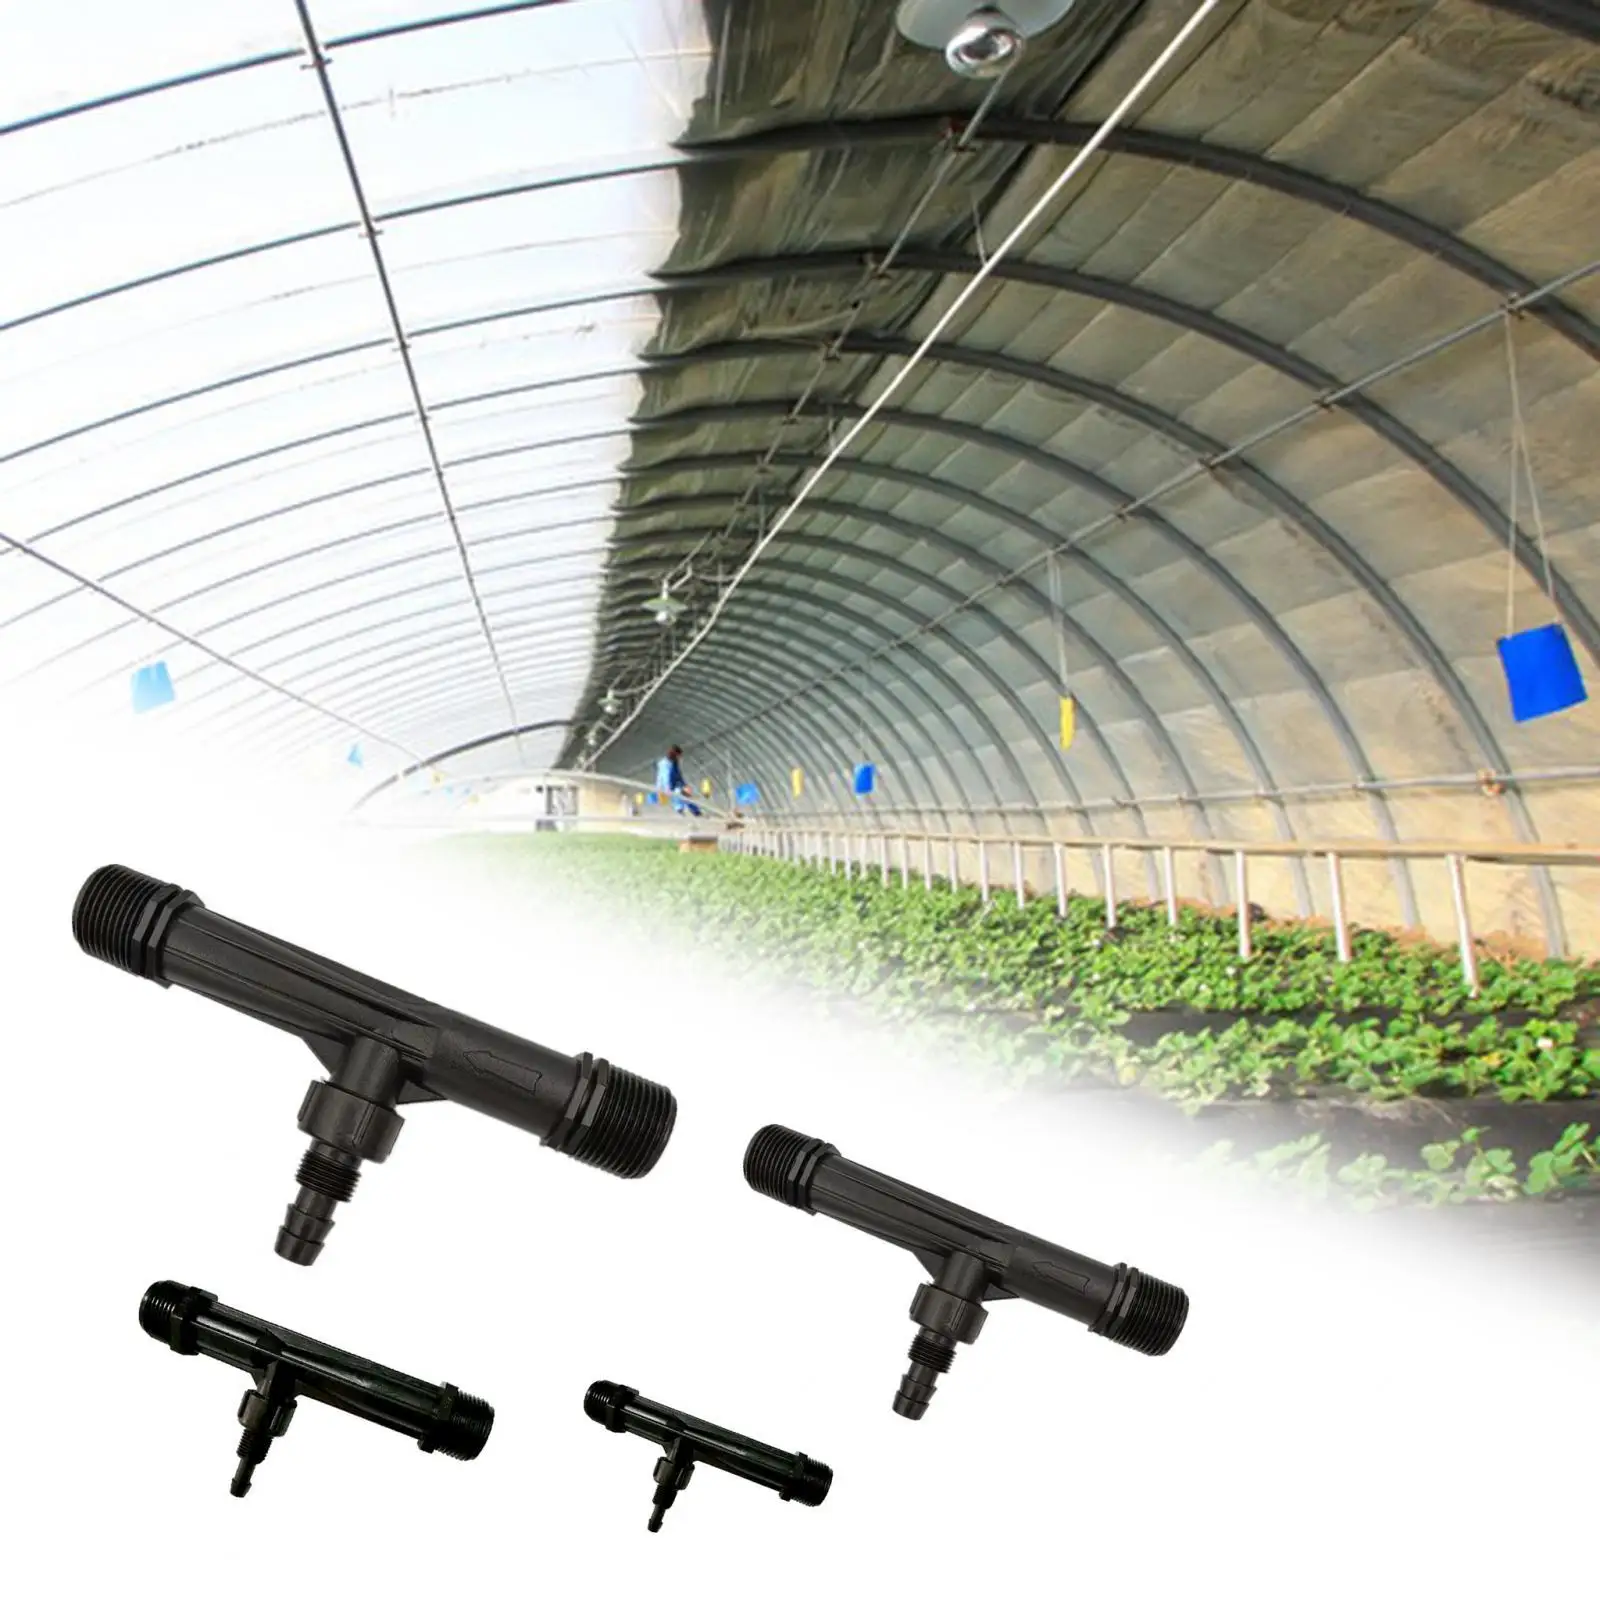 Venturi Fertilizer Injector Watering Equipment Irrigation Pipe Irrigation Device Tube for Agriculture Gardening Lawn Greenhouse